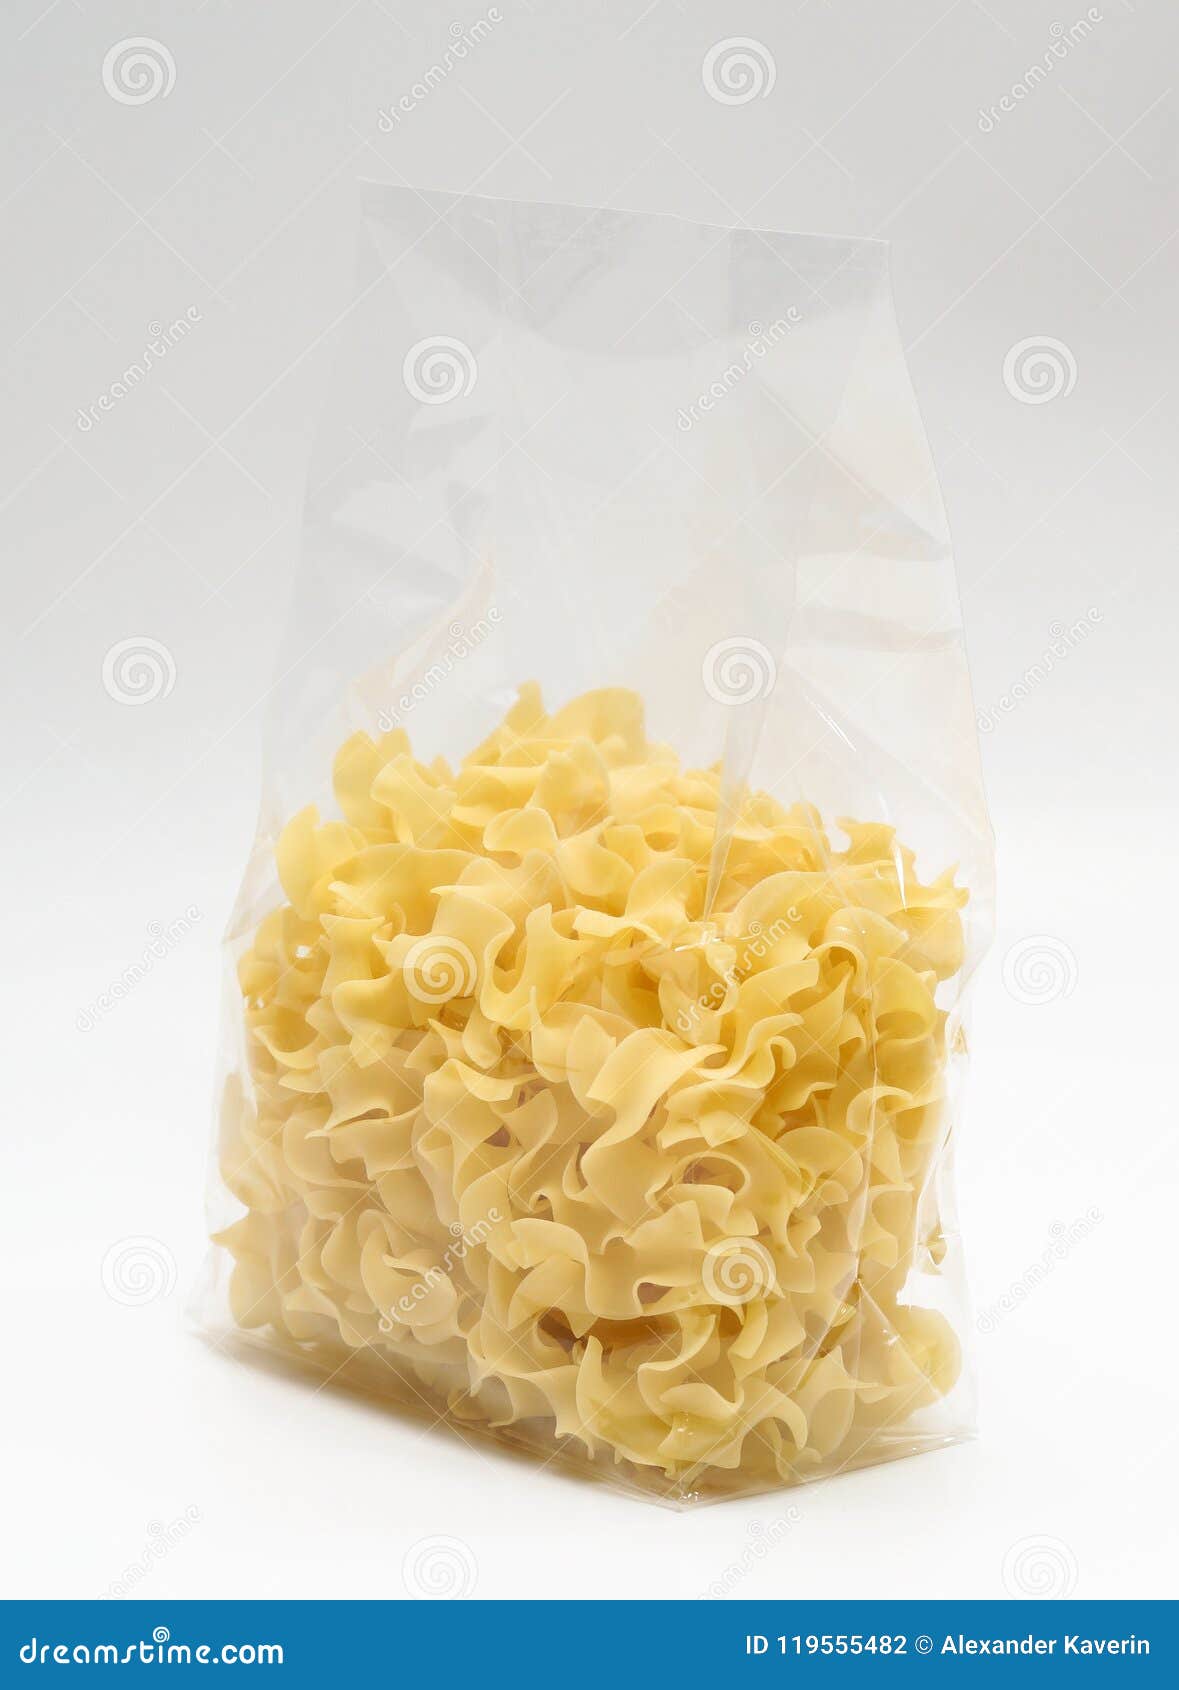 189 Pasta Bag Transparent Photos Free Royalty Free Stock Photos From Dreamstime